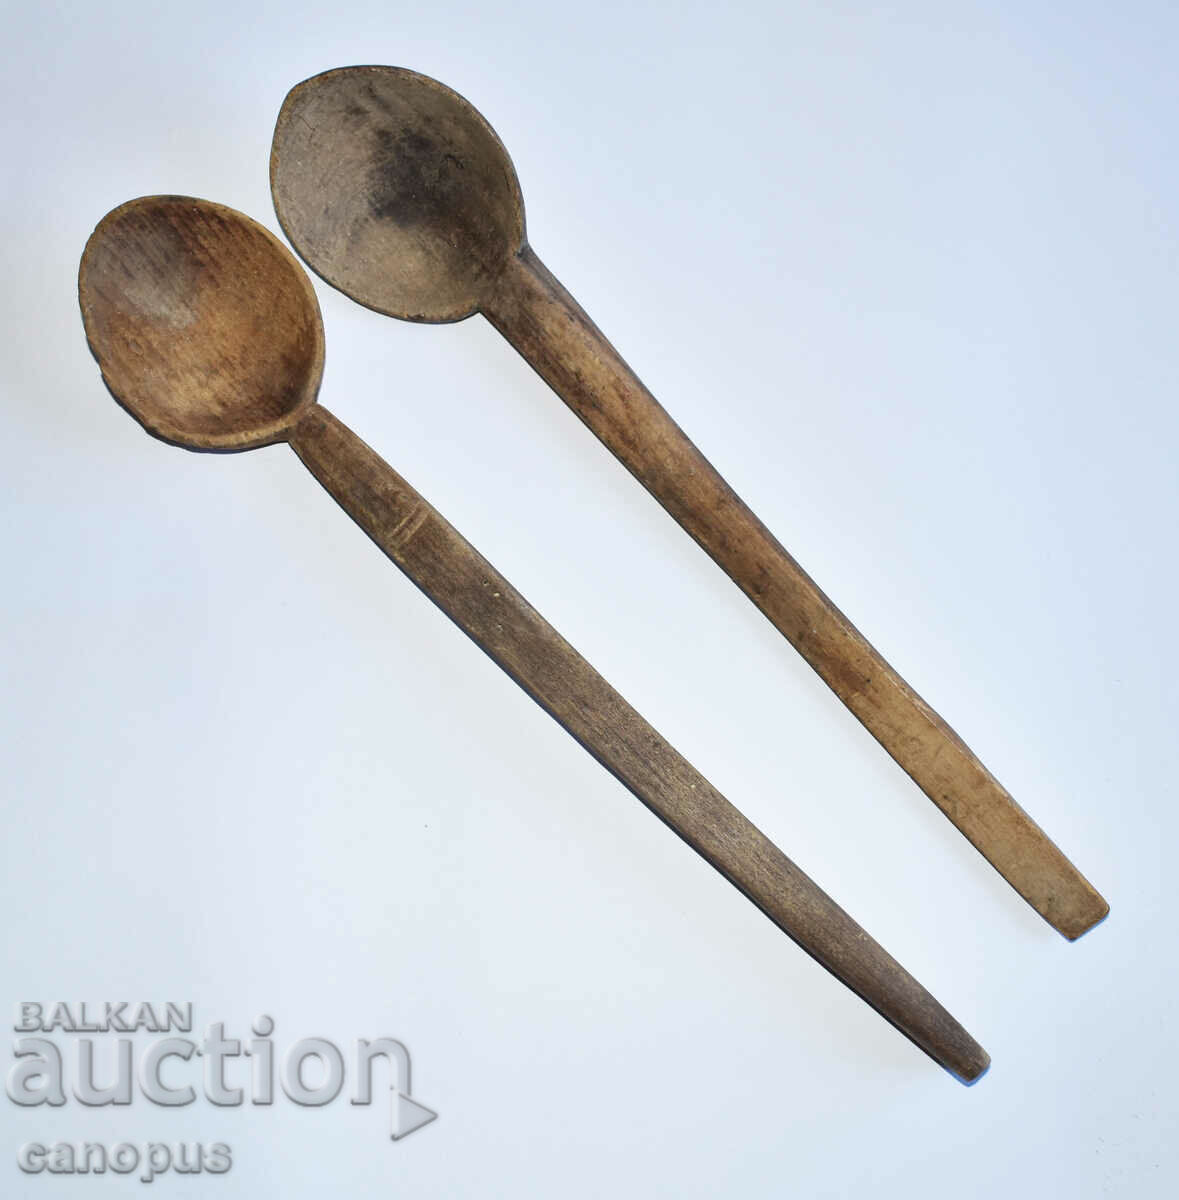 Old Wooden Spoon - 2 pcs Wooden Spoons for Decoration